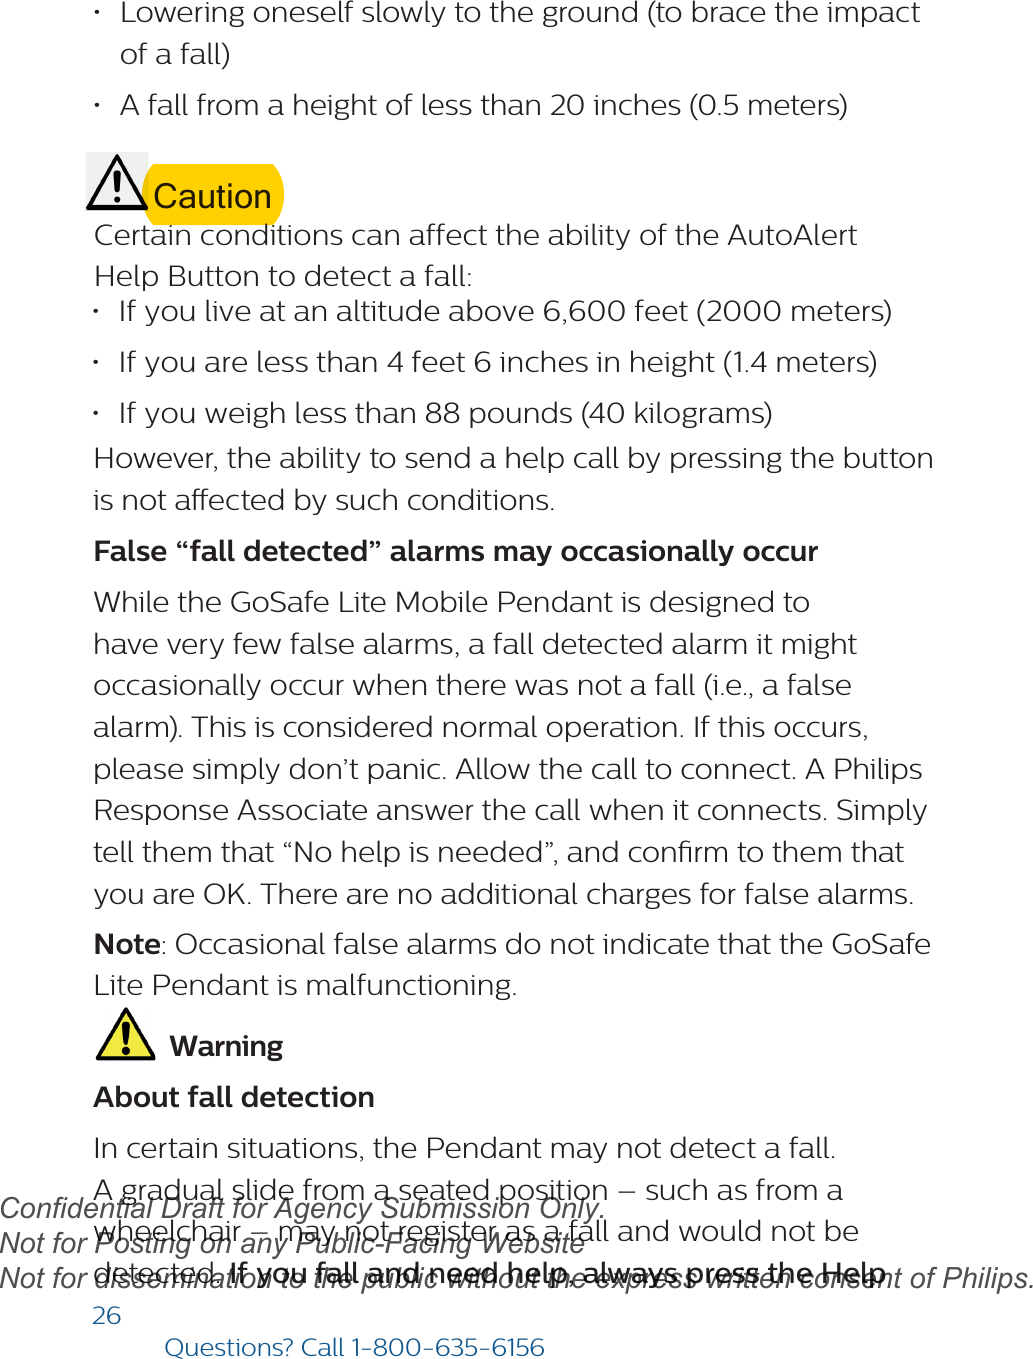 26Questions? Call1-800-635-6156•Lowering oneself slowly to the ground (to brace the impactof a fall)•A fall from a height of less than 20 inches (0.5 meters)CautionCertain conditions can affect the ability of the AutoAlert Help Button to detect a fall: •If you live at an altitude above 6,600 feet (2000 meters)•If you are less than 4 feet 6 inches in height (1.4 meters)•If you weigh less than 88 pounds (40 kilograms)However, the ability to send a help call by pressing the buttonis not aected by such conditions.False “fall detected” alarms may occasionally occur While the GoSafe Lite Mobile Pendant is designed to have very few false alarms, a fall detected alarm it might occasionally occur when there was not a fall (i.e., a false alarm). This is considered normal operation. If this occurs, please simply don’t panic. Allow the call to connect. A Philips Response Associate answer the call when it connects. Simply tell them that “No help is needed”, and conrm to them that you are OK. There are no additional charges for false alarms. Note: Occasional false alarms do not indicate that the GoSafe Lite Pendant is malfunctioning. WarningAbout fall detectionIn certain situations, the Pendant may not detect a fall. A gradual slide from a seated position – such as from a wheelchair – may not register as a fall and would not be detected. If you fall and need help, always press the Help draftConfidential Draft for Agency Submission Only.   Not for Posting on any Public-Facing Website Not for dissemination to the public without the express written consent of Philips.